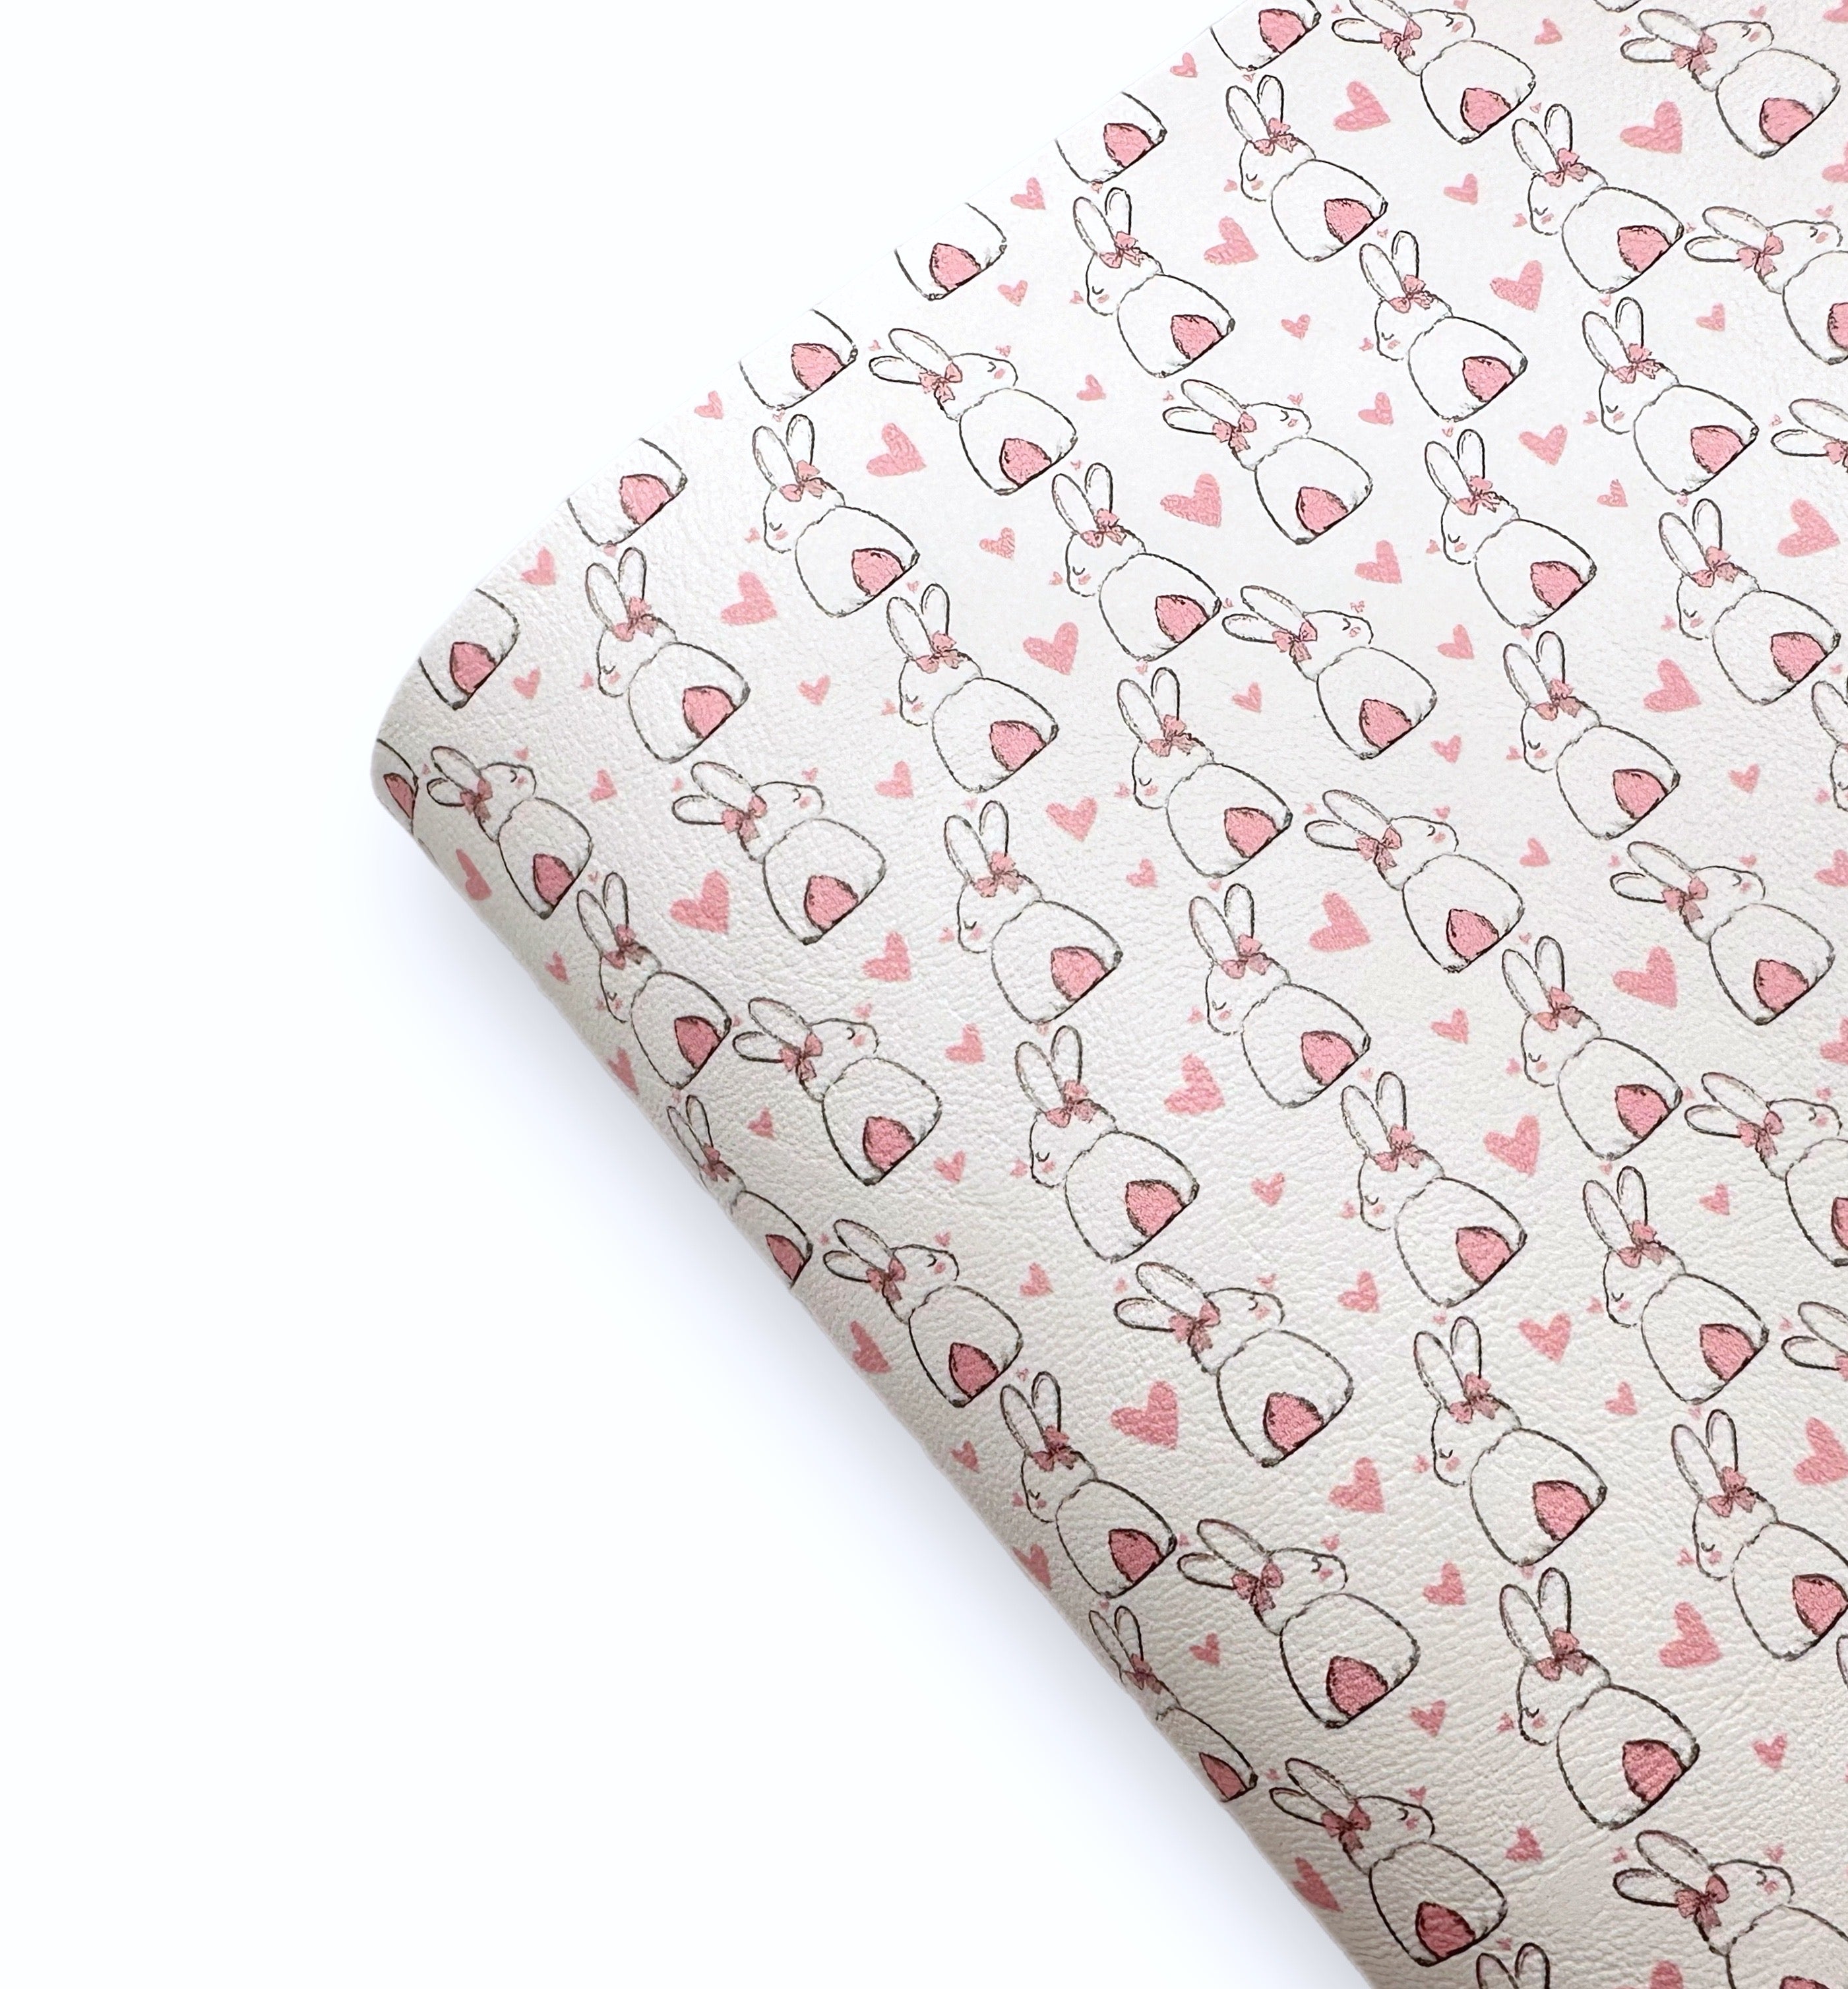 White Bunny Heart Hops Premium Faux Leather Fabric